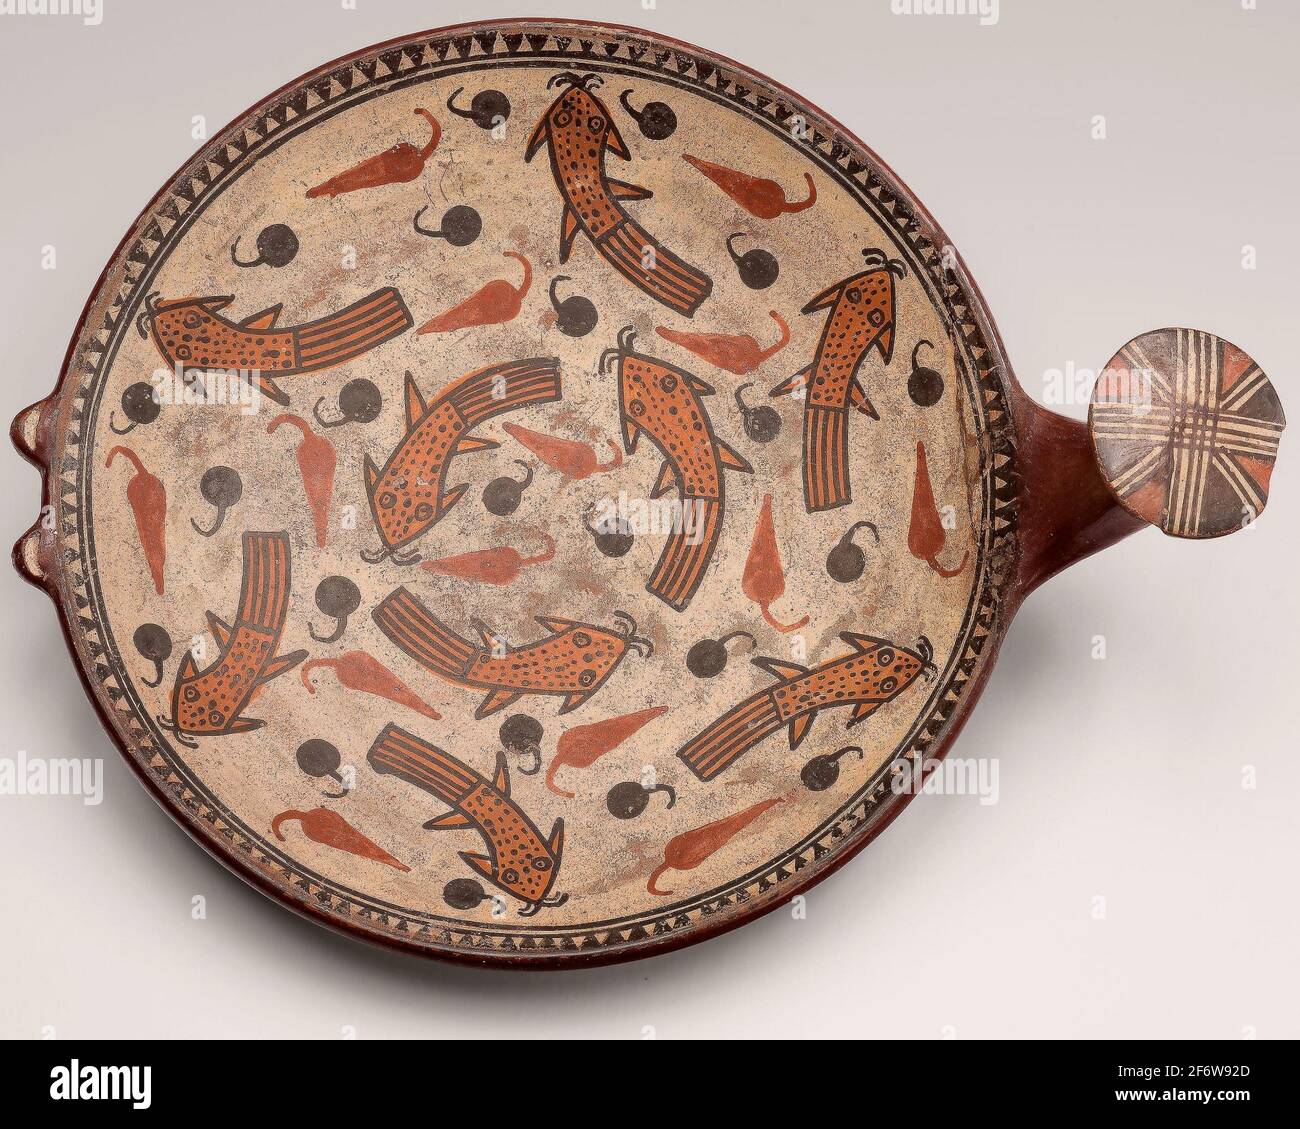 Author: Inca. Minitature Tray Depicting Suche Fish and Peppers - A.D. 1450/1532 - Inca Probably vicinity of Cuzco, Peru. Ceramic and pigment. 1450 - Stock Photo